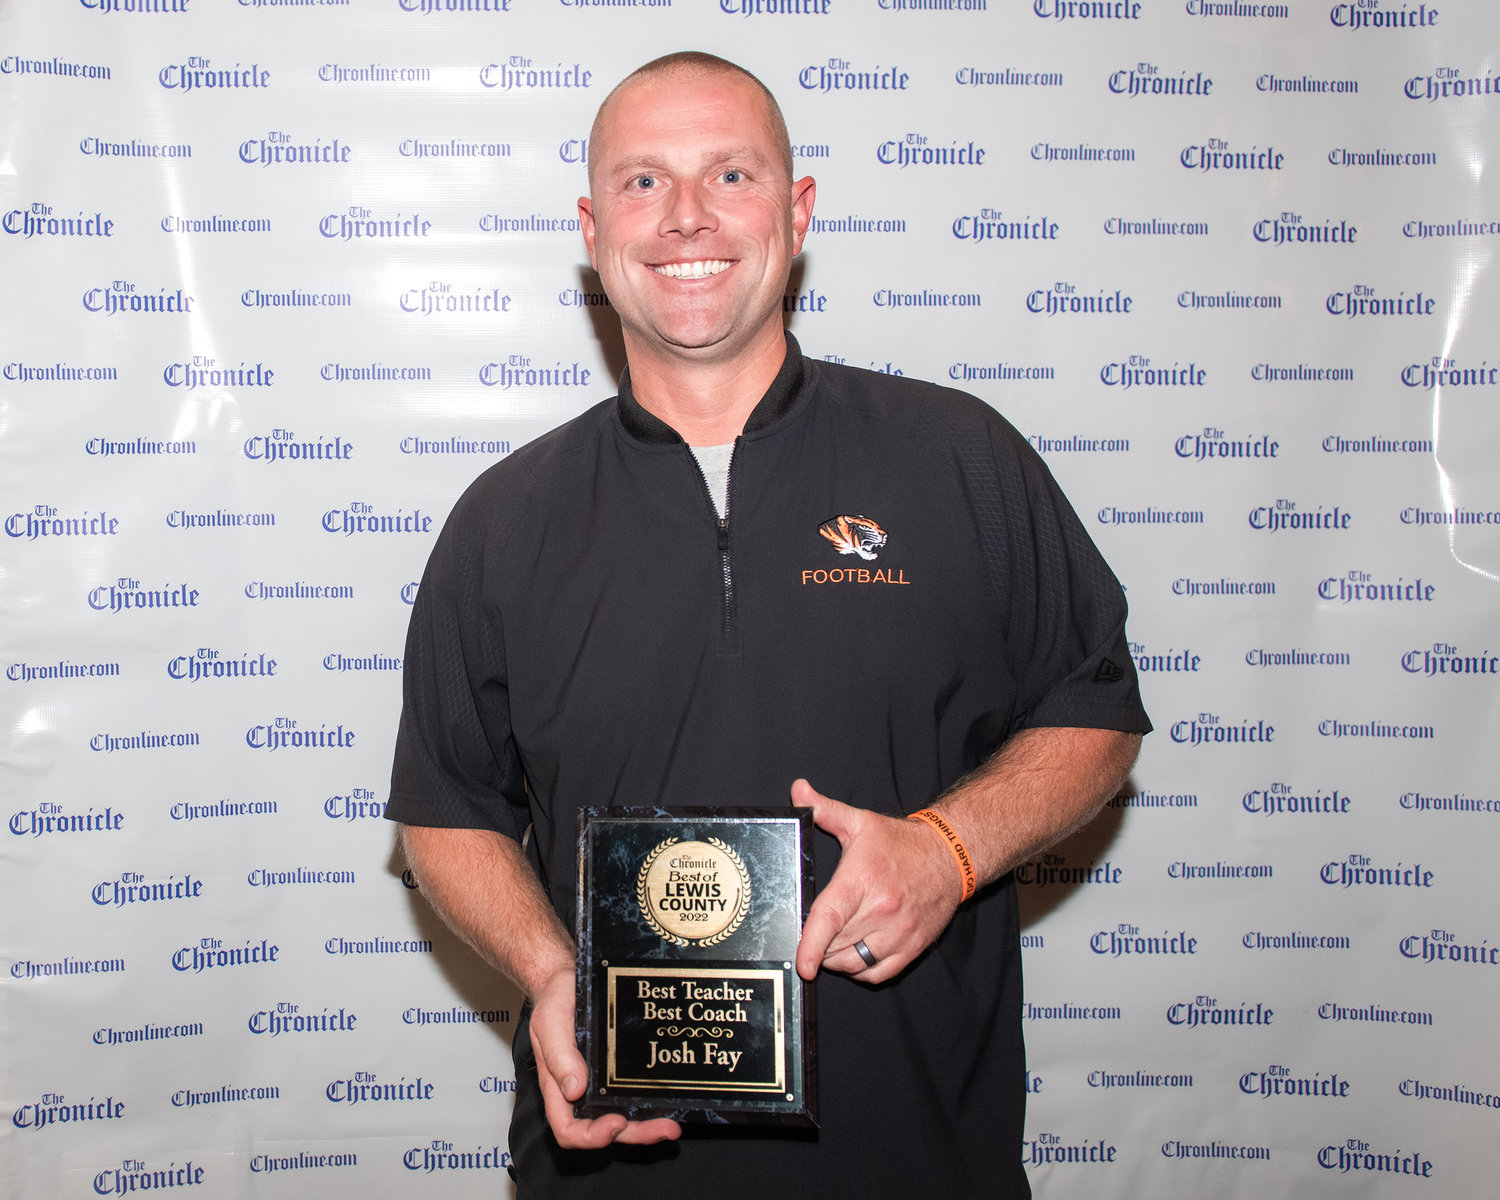 Josh Fay won “Best Teacher and Best Coach” during the 2022 Best of Lewis County event hosted by The Chronicle at The Juice Box Thursday evening in Centralia.